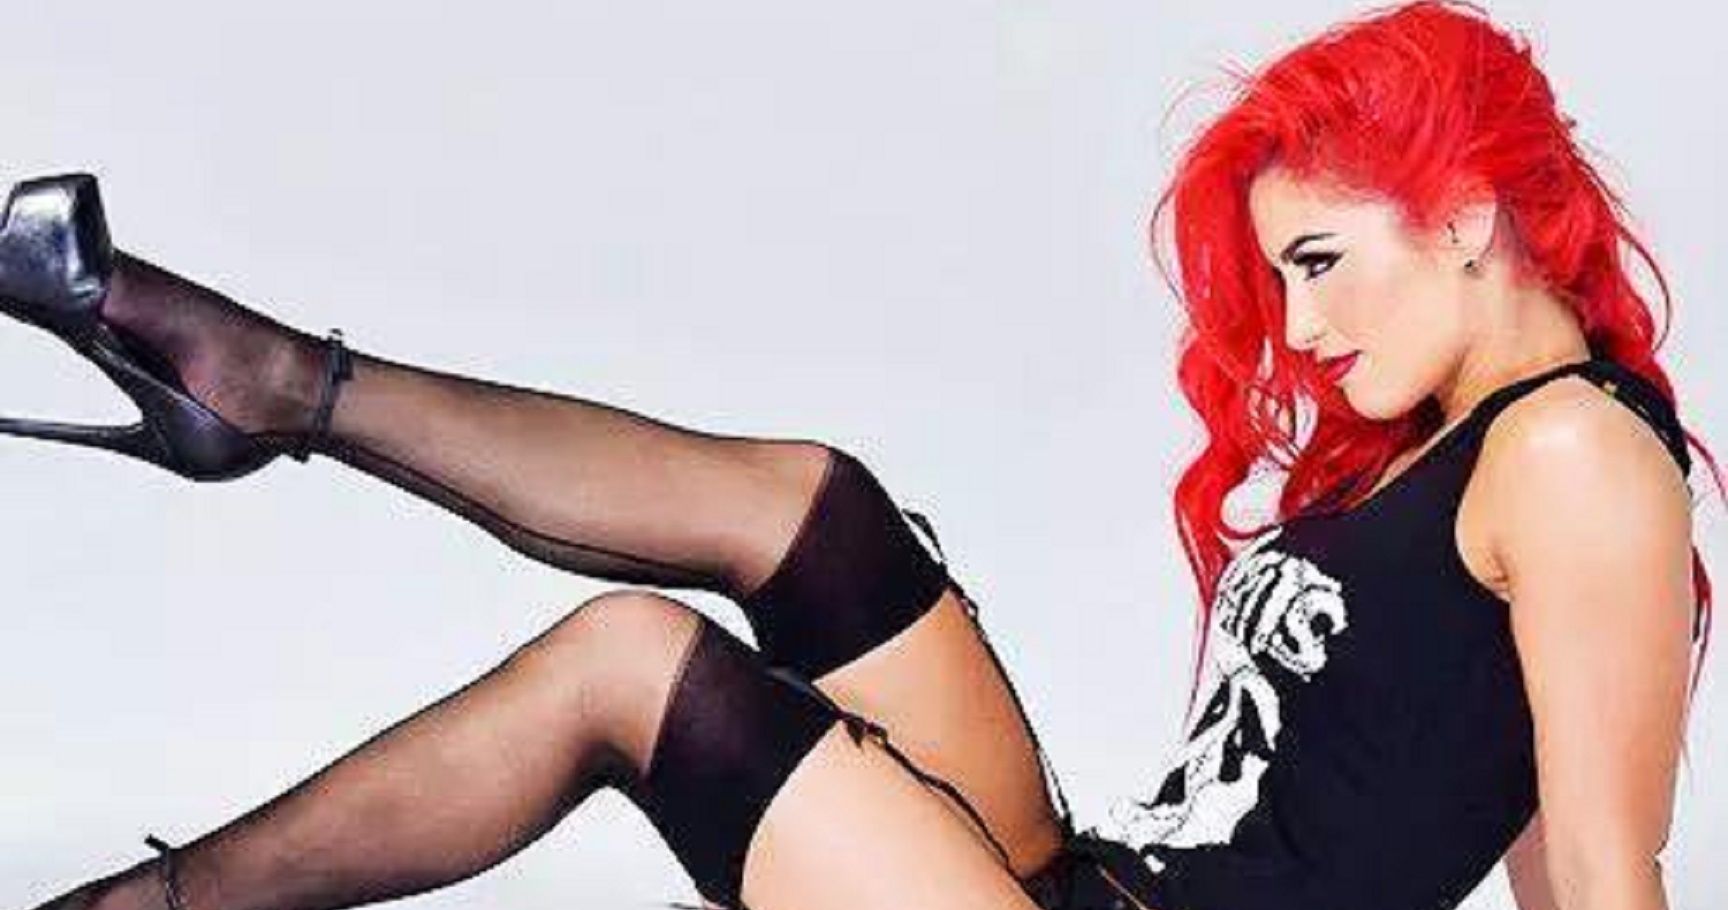 david whitehead jr recommends eva marie sexy pictures pic